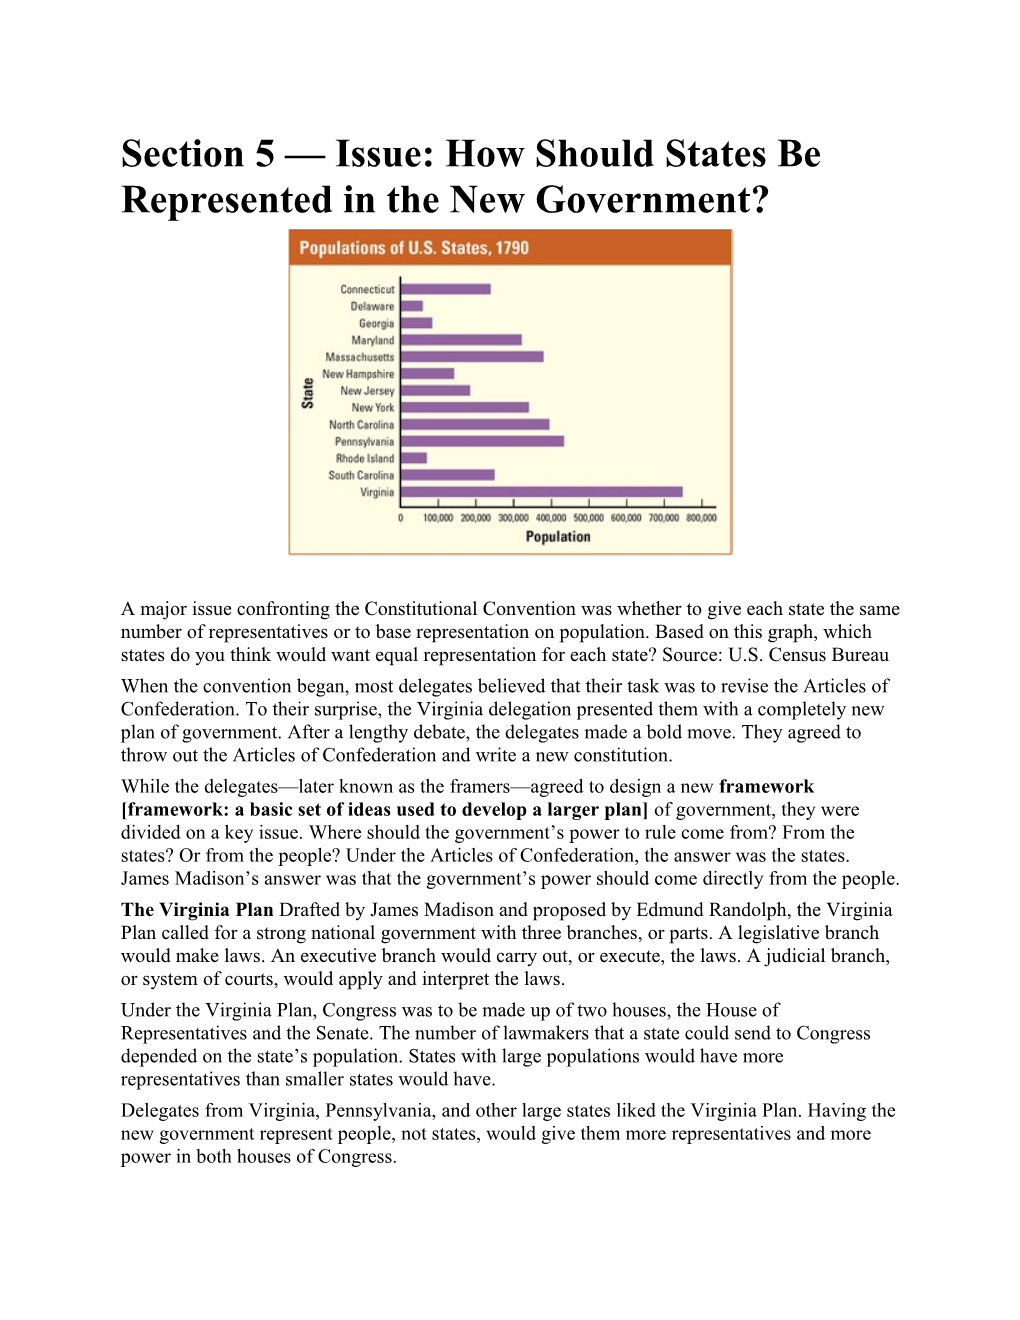 Section 5 Issue: How Should States Be Represented in the New Government?